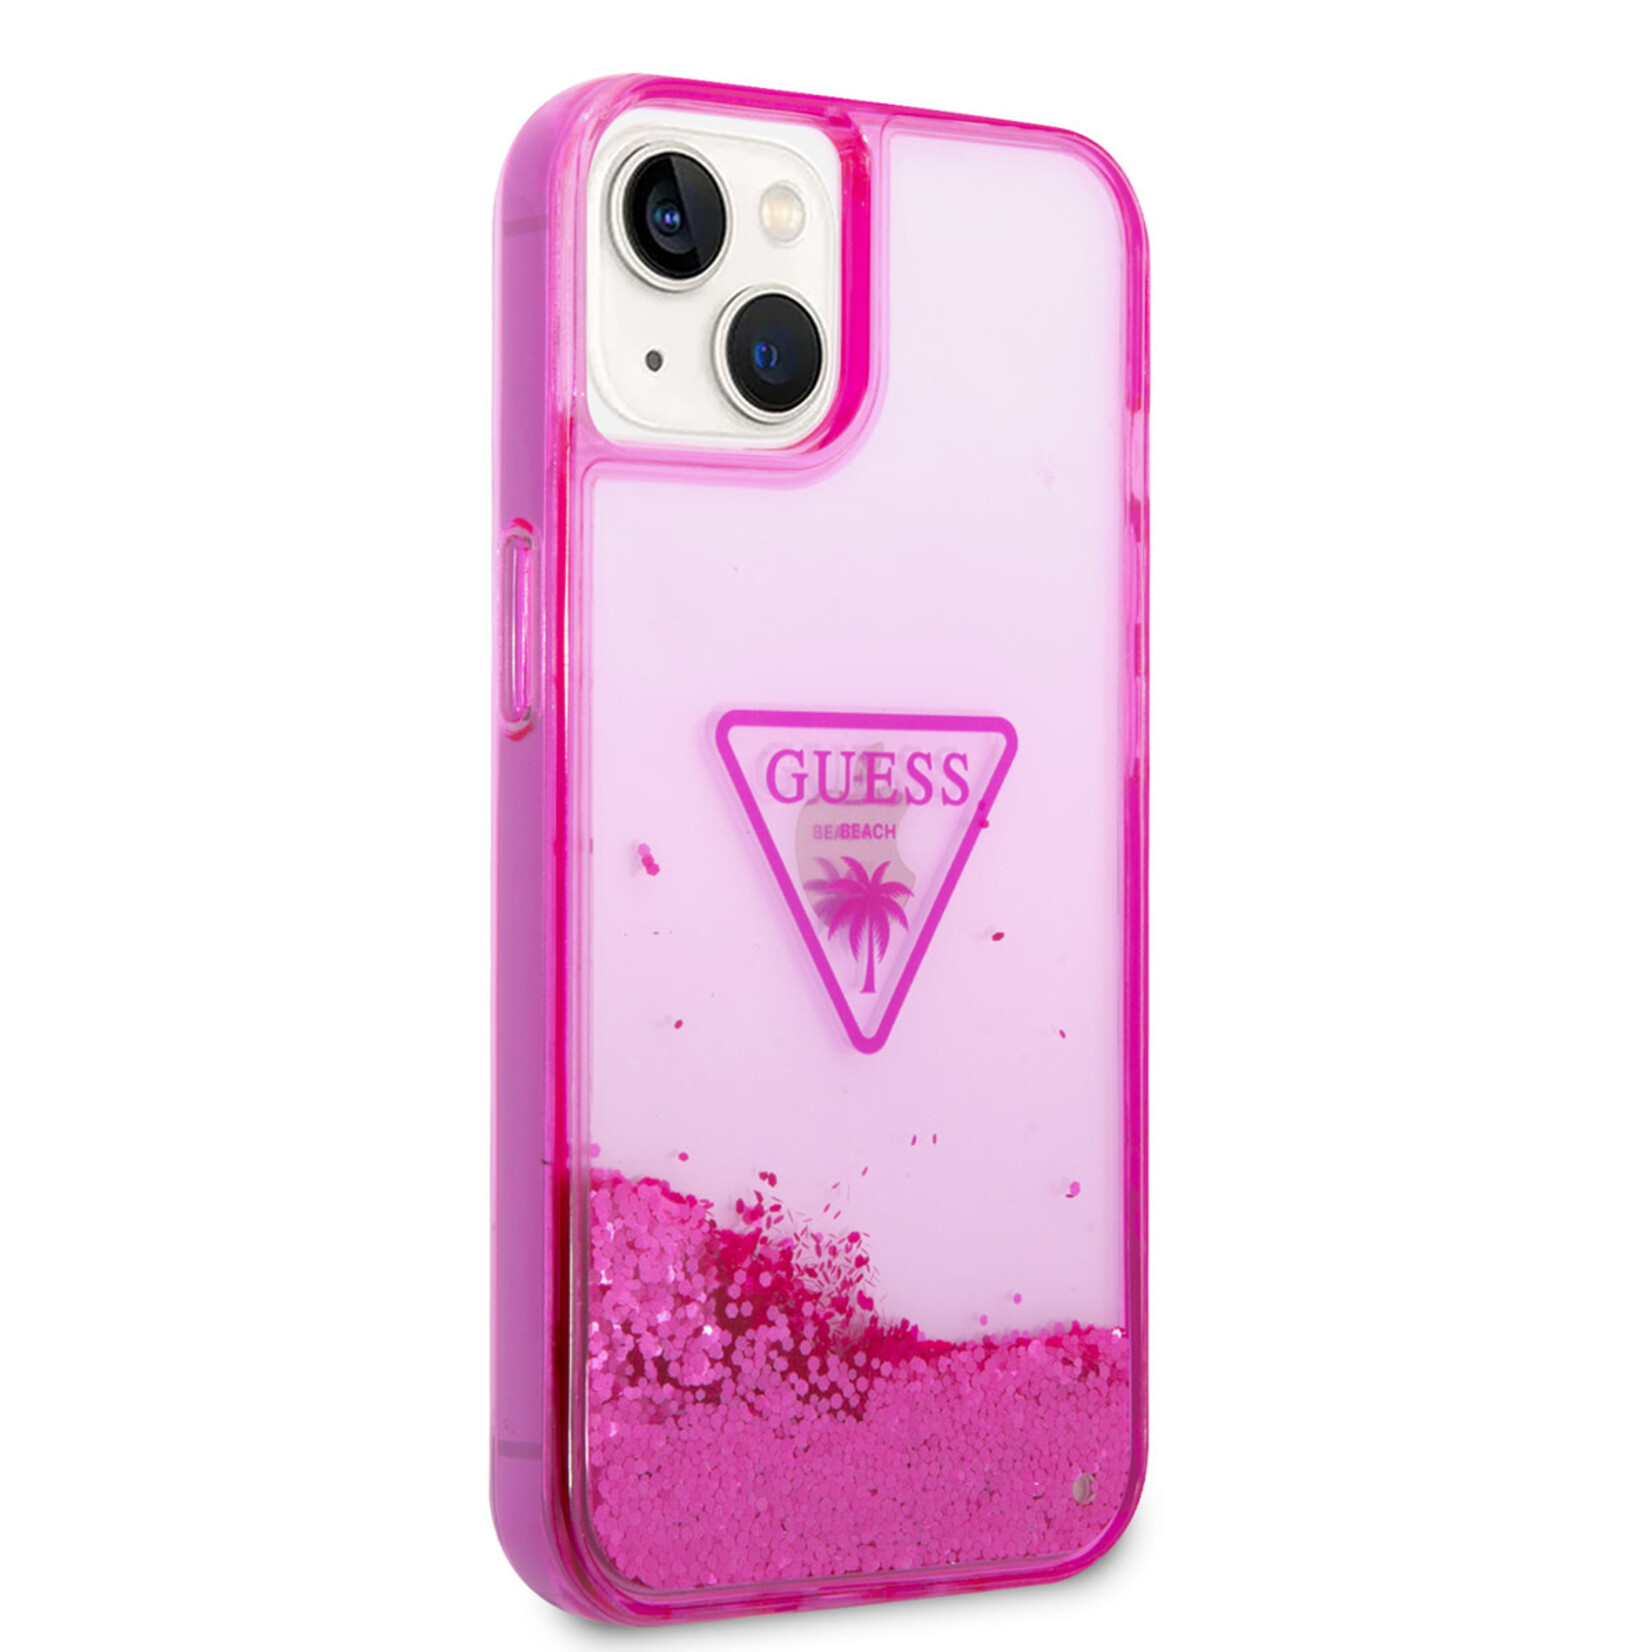 Guess Guess Telefoonhoesje voor Apple iPhone 14 Plus - Roze, Transparant, Bescherming, Back Cover - TPU Materiaal